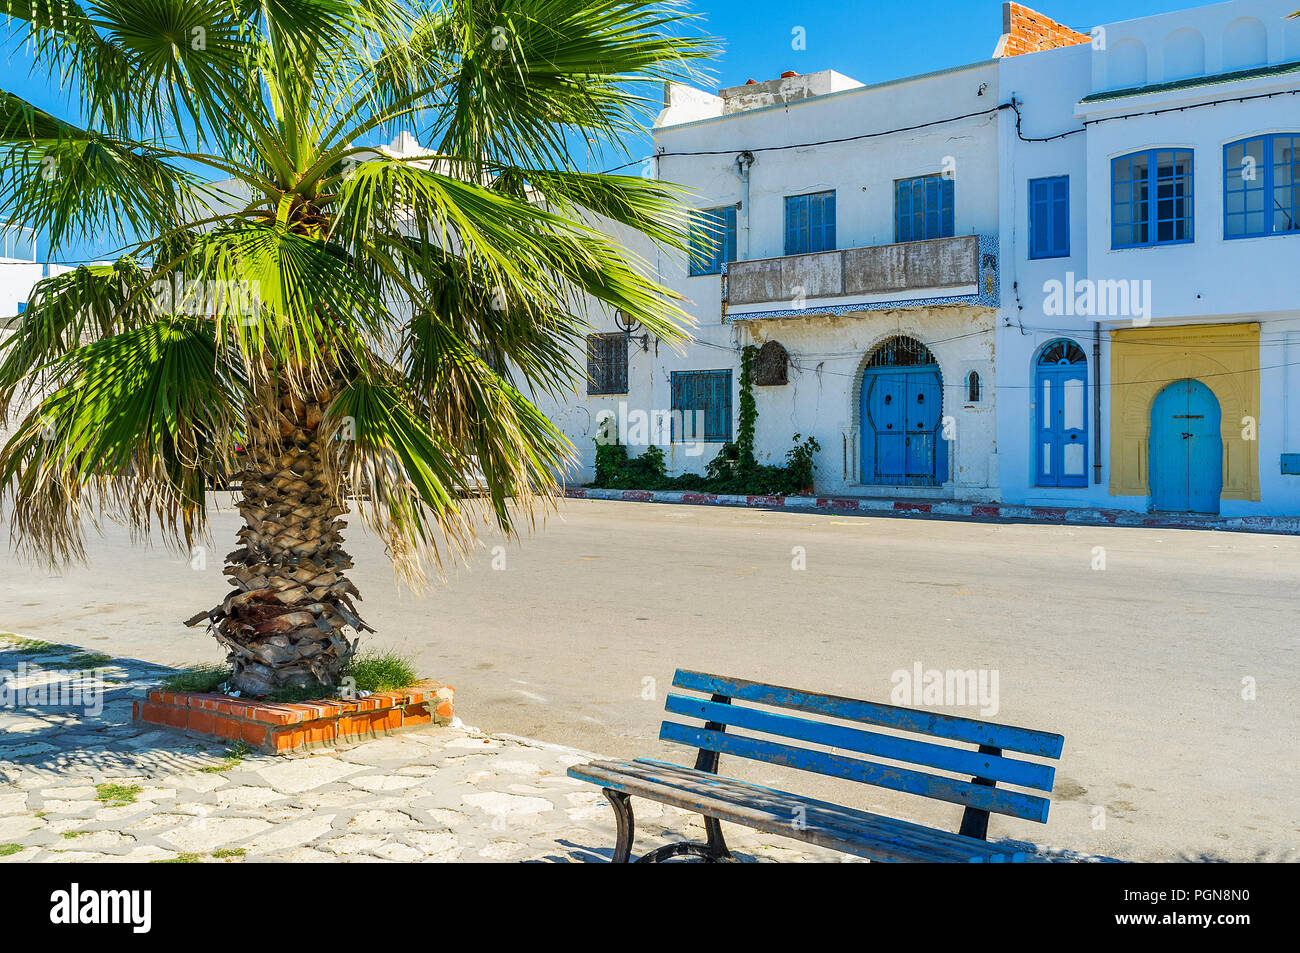 The seaside promenade with lush palms and small benches and a view on the old houses, stretching along the coast, Mahdia, Tunisia. Stock Photo